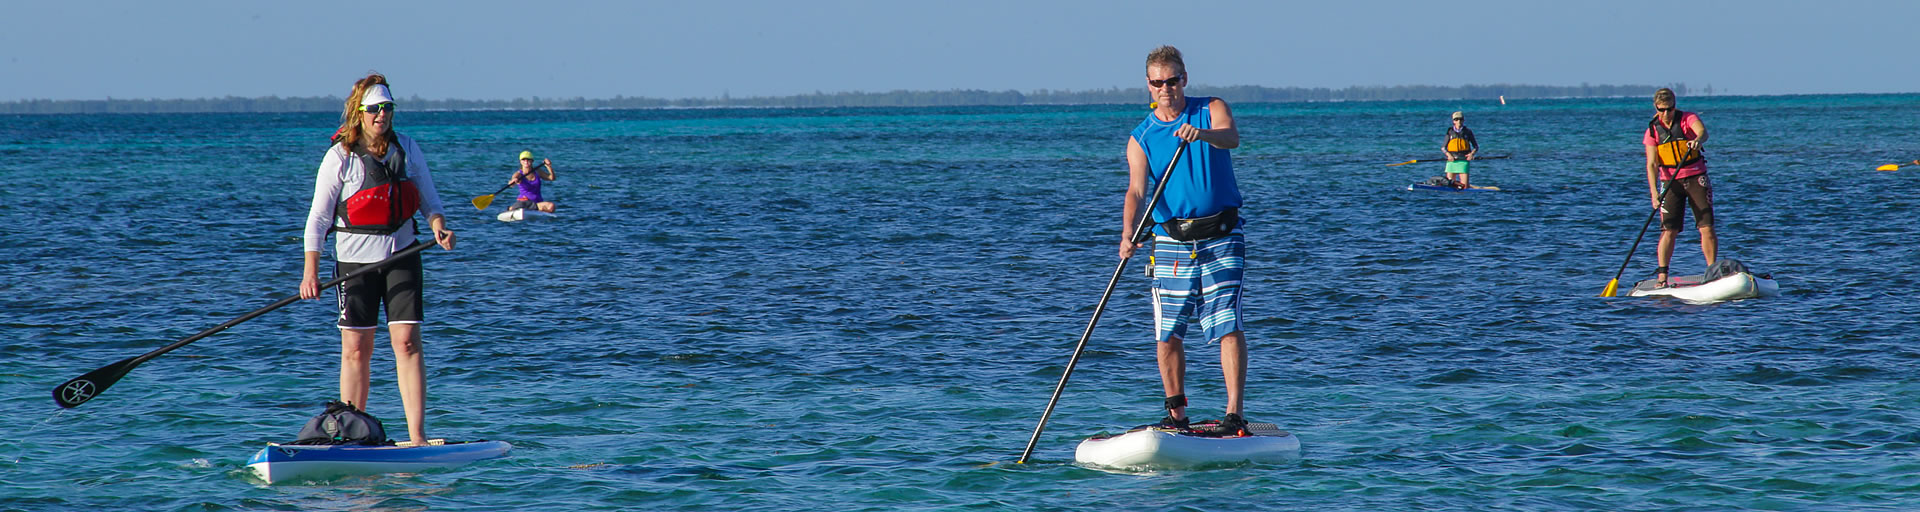 Stand Up Paddleboard (SUP) along Belize Barrier Reef